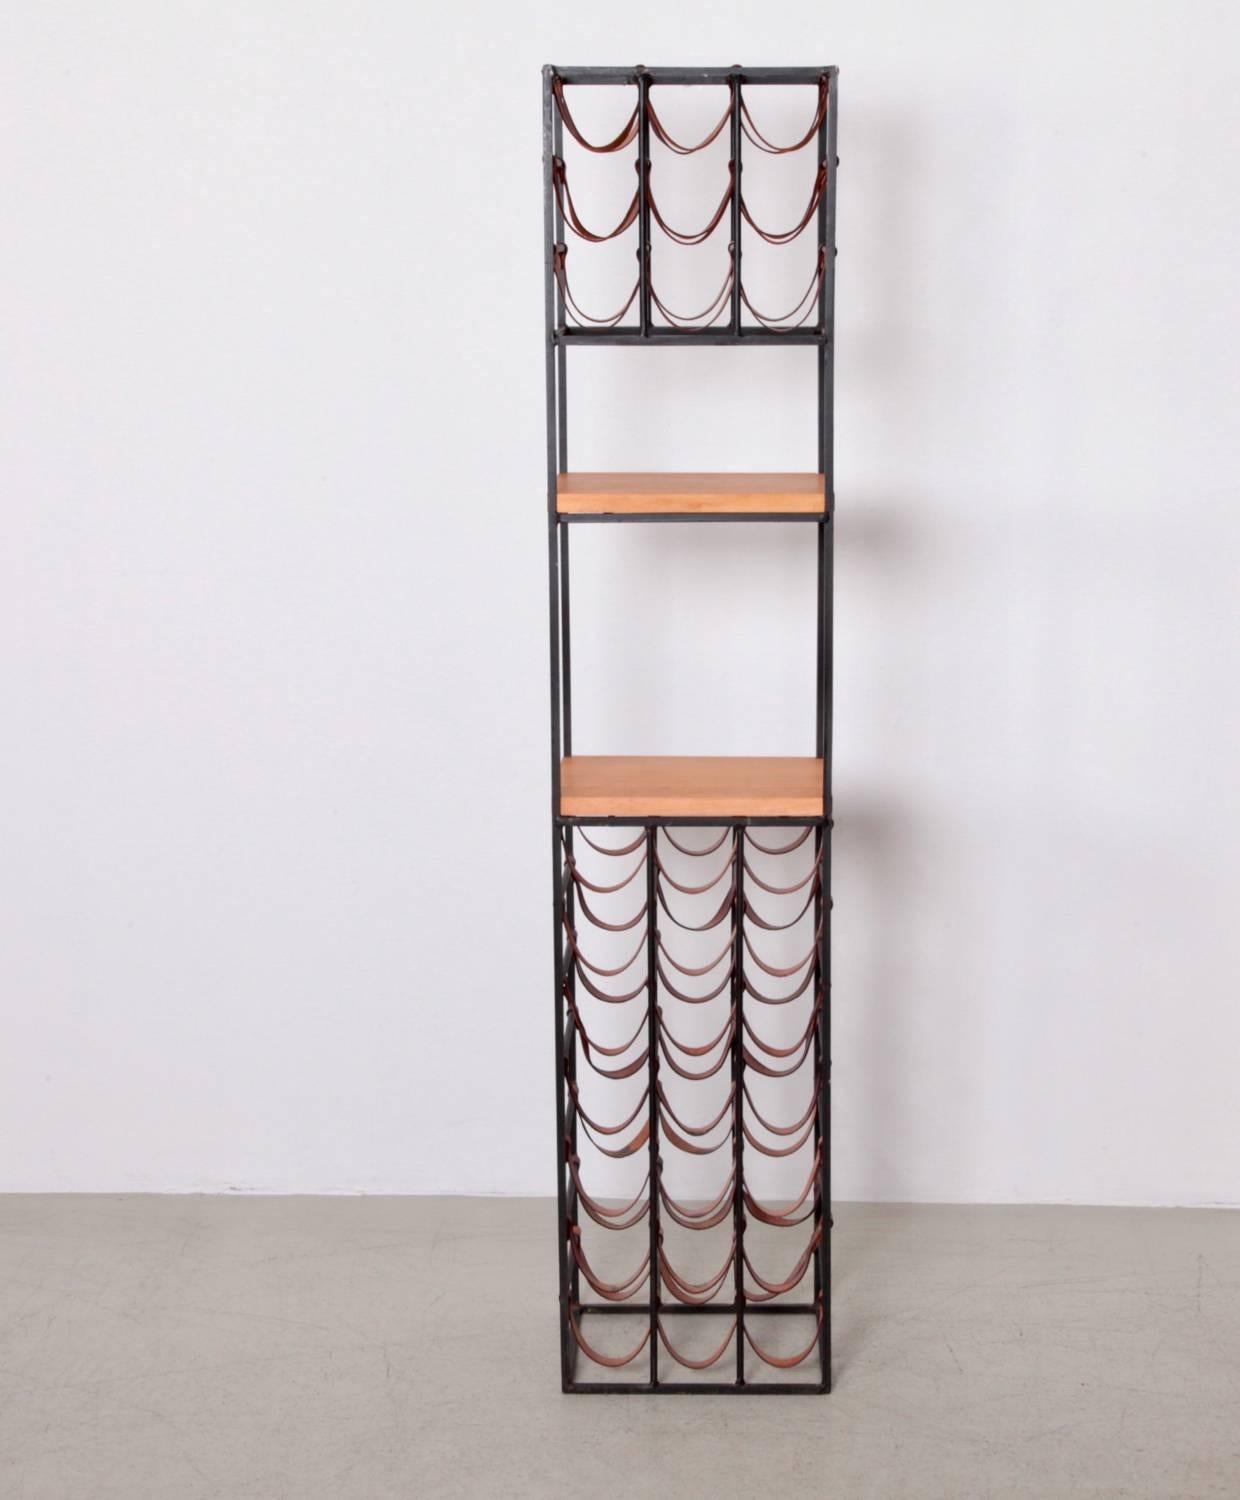 Large tower wine racks by Arthur Umanoff, made of wrought iron with leather straps, two butcher block shelves for cutting or display, holds 30 bottles.